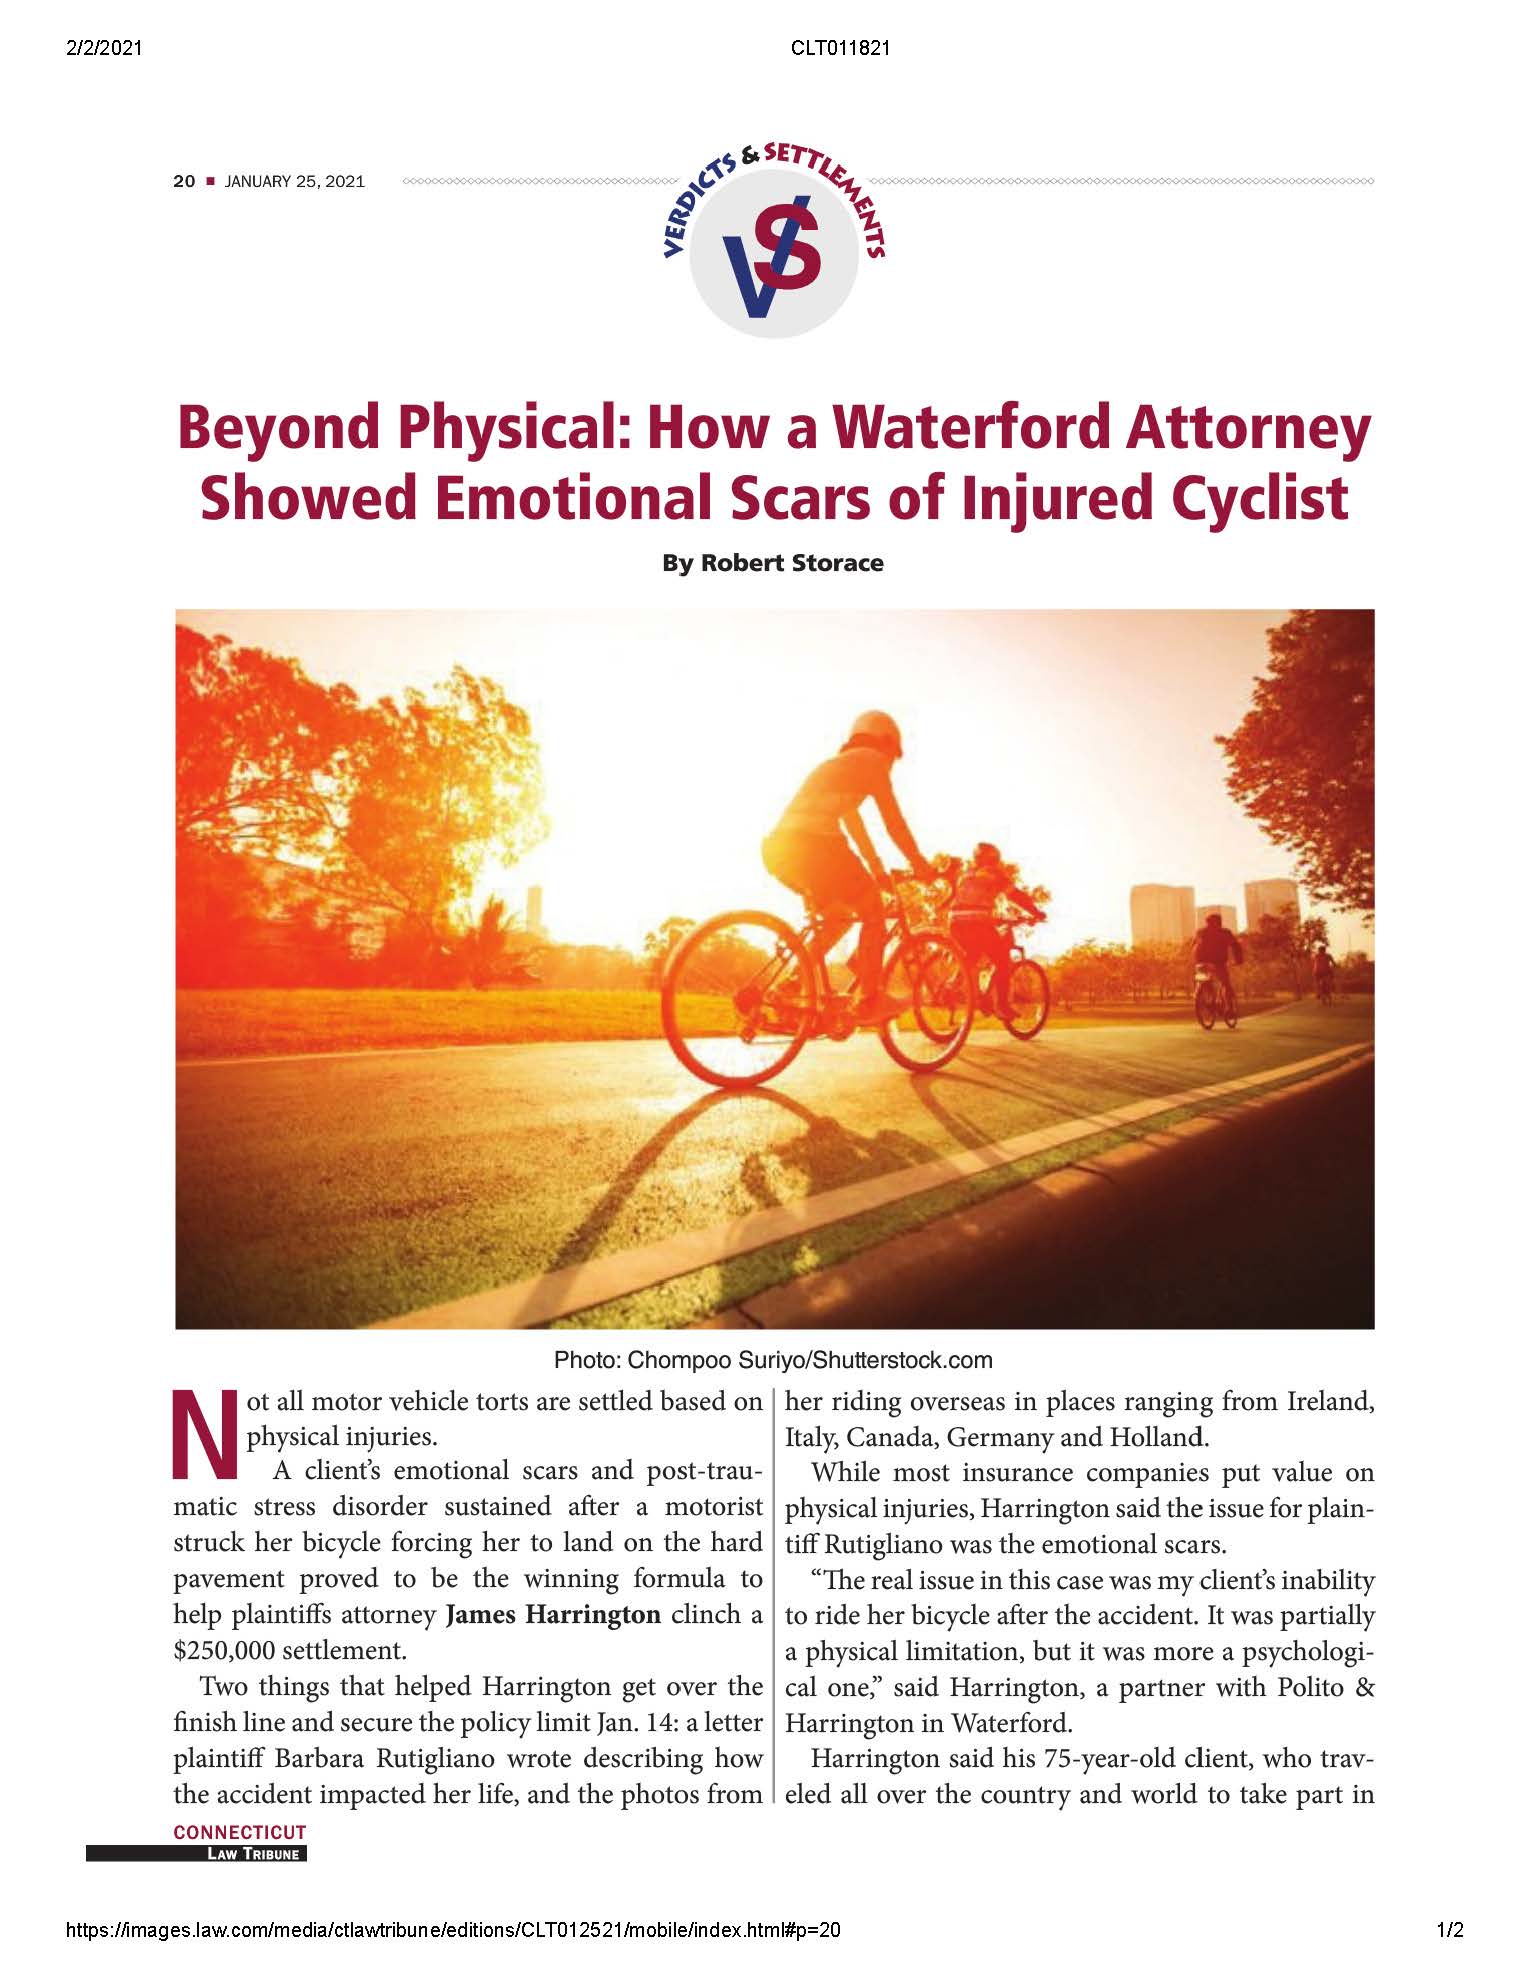 Connecticut Law Tribune: How a Waterford Attorney Showed Emotional Scars of Injured Cyclist